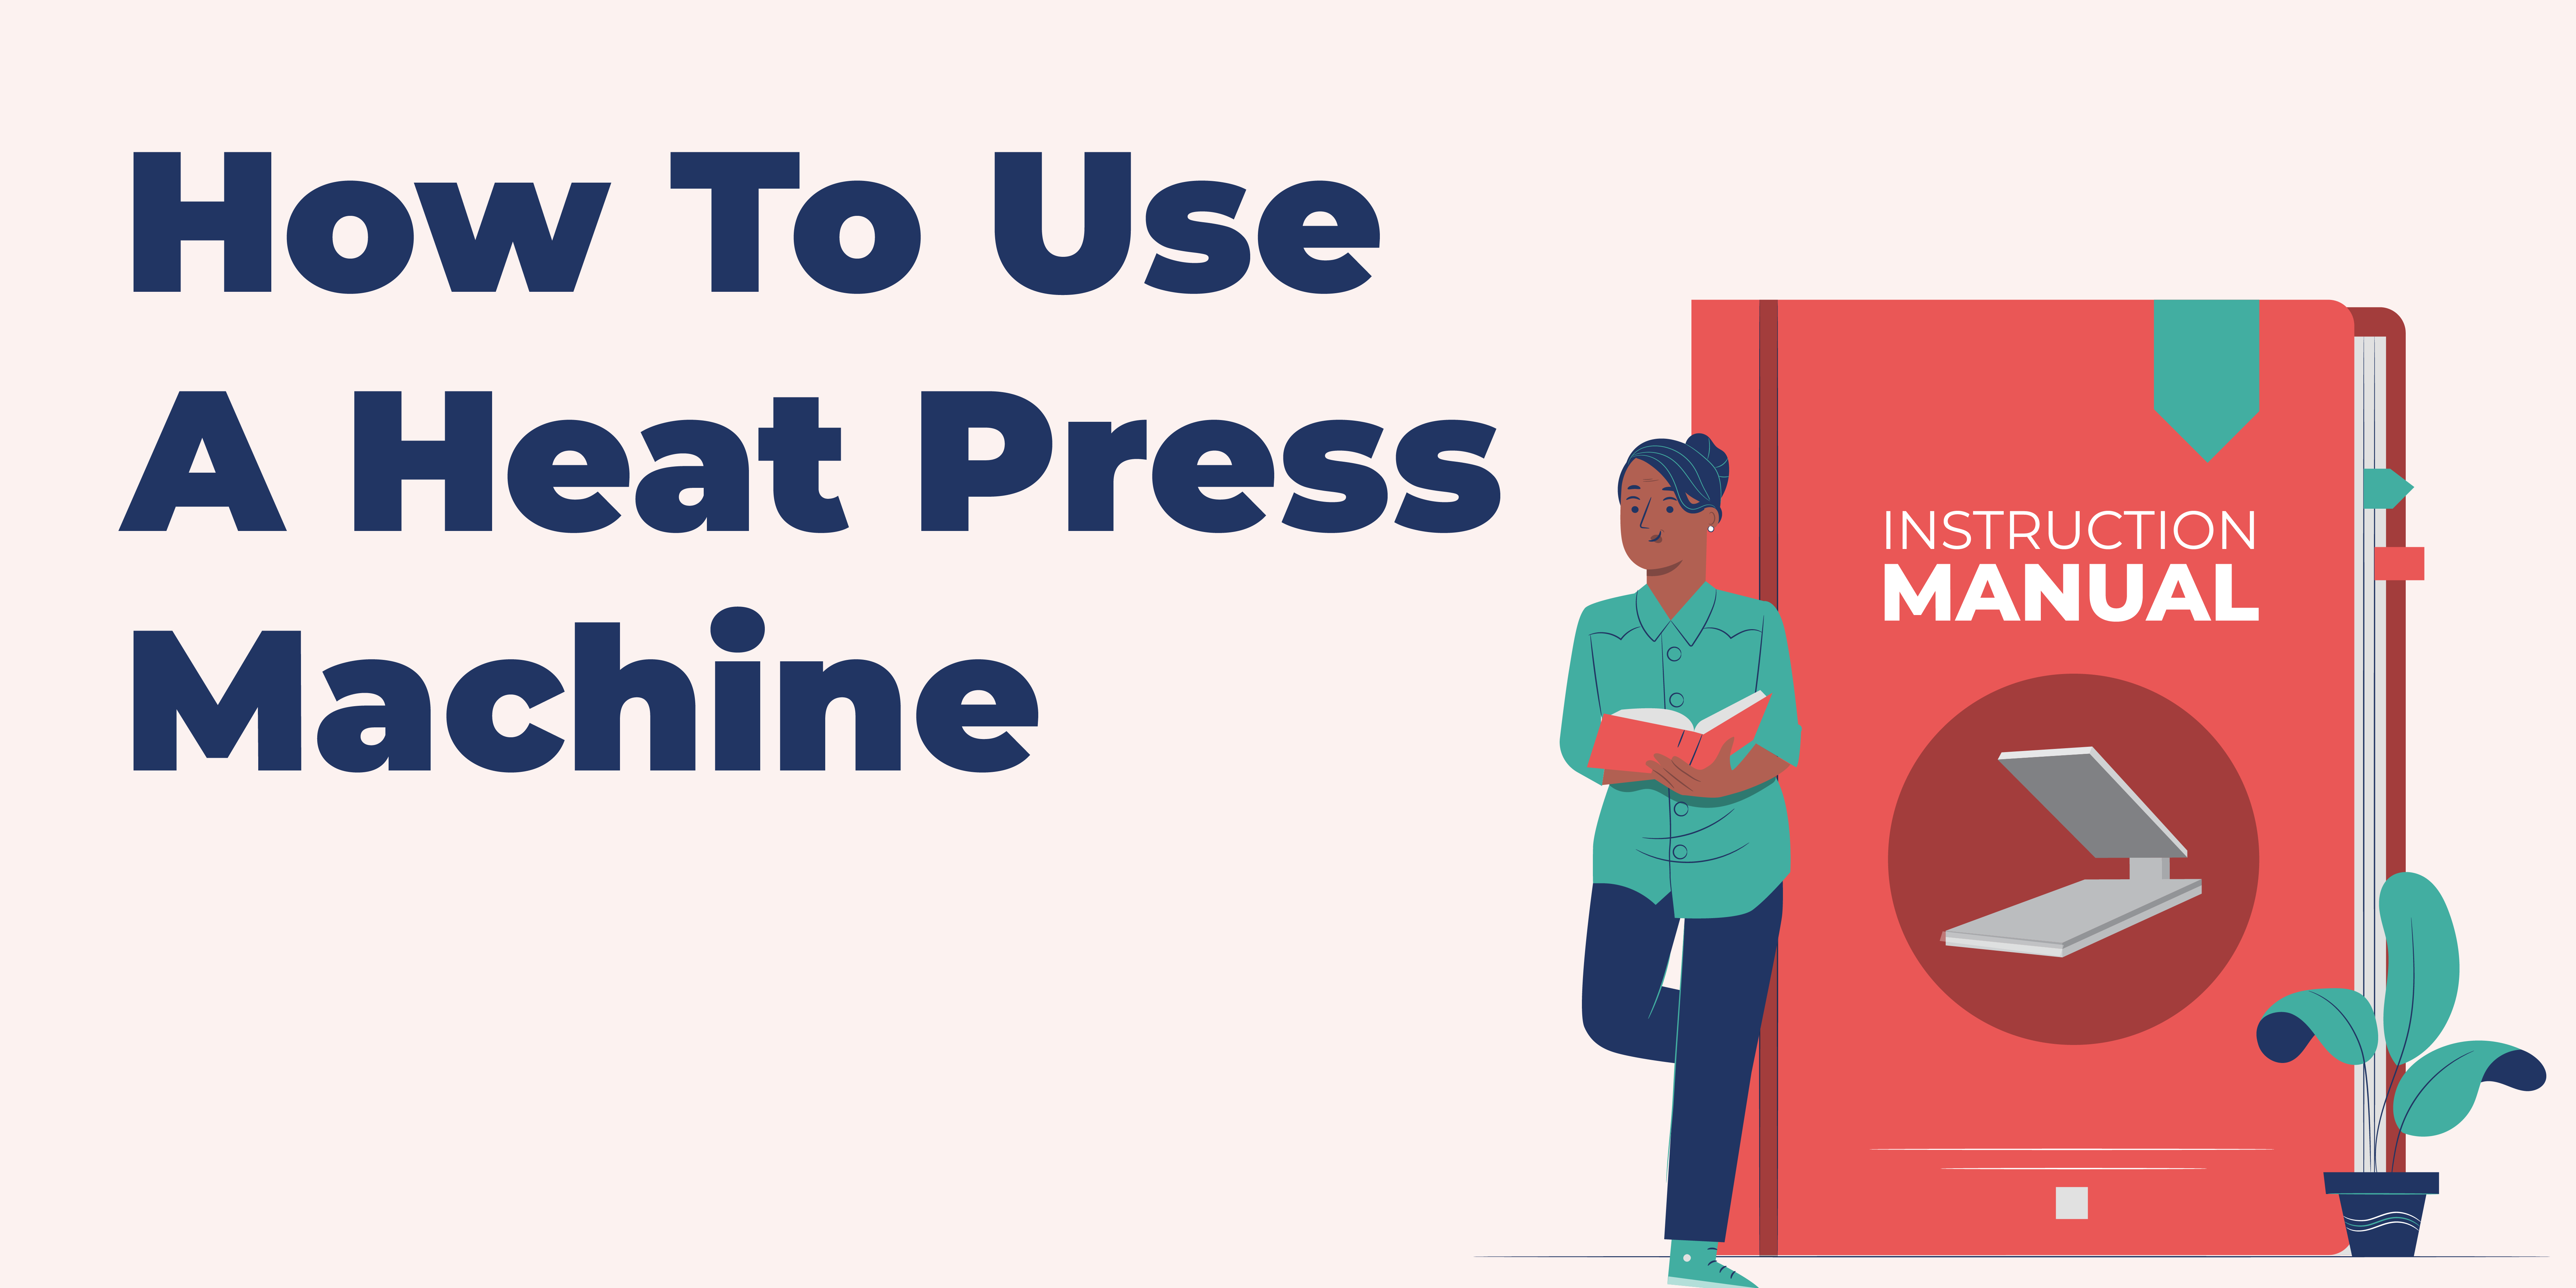 How To Use A Heat Press